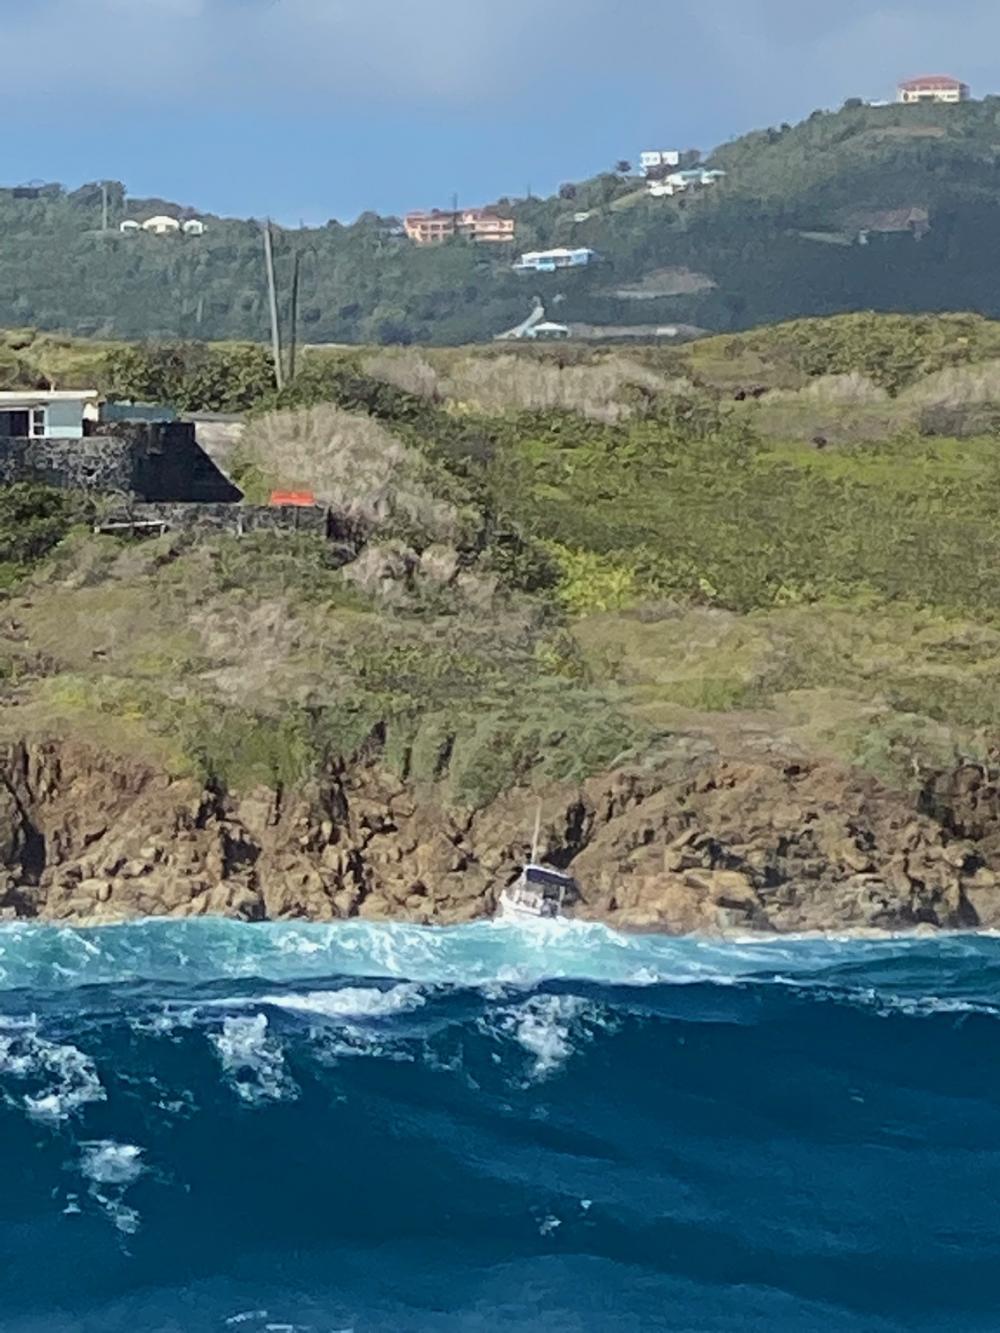 The vessel Katana sits on the rocks off Judith's Fancy, St. Croix, on Monday. Nine people were rescued from the boat on Sunday evening after it ran out of fuel and was drifting toward the reef line, according to the Coast Guard. (Photo courtesy of U.S. Coast Guard District 7 PADET San Juan)